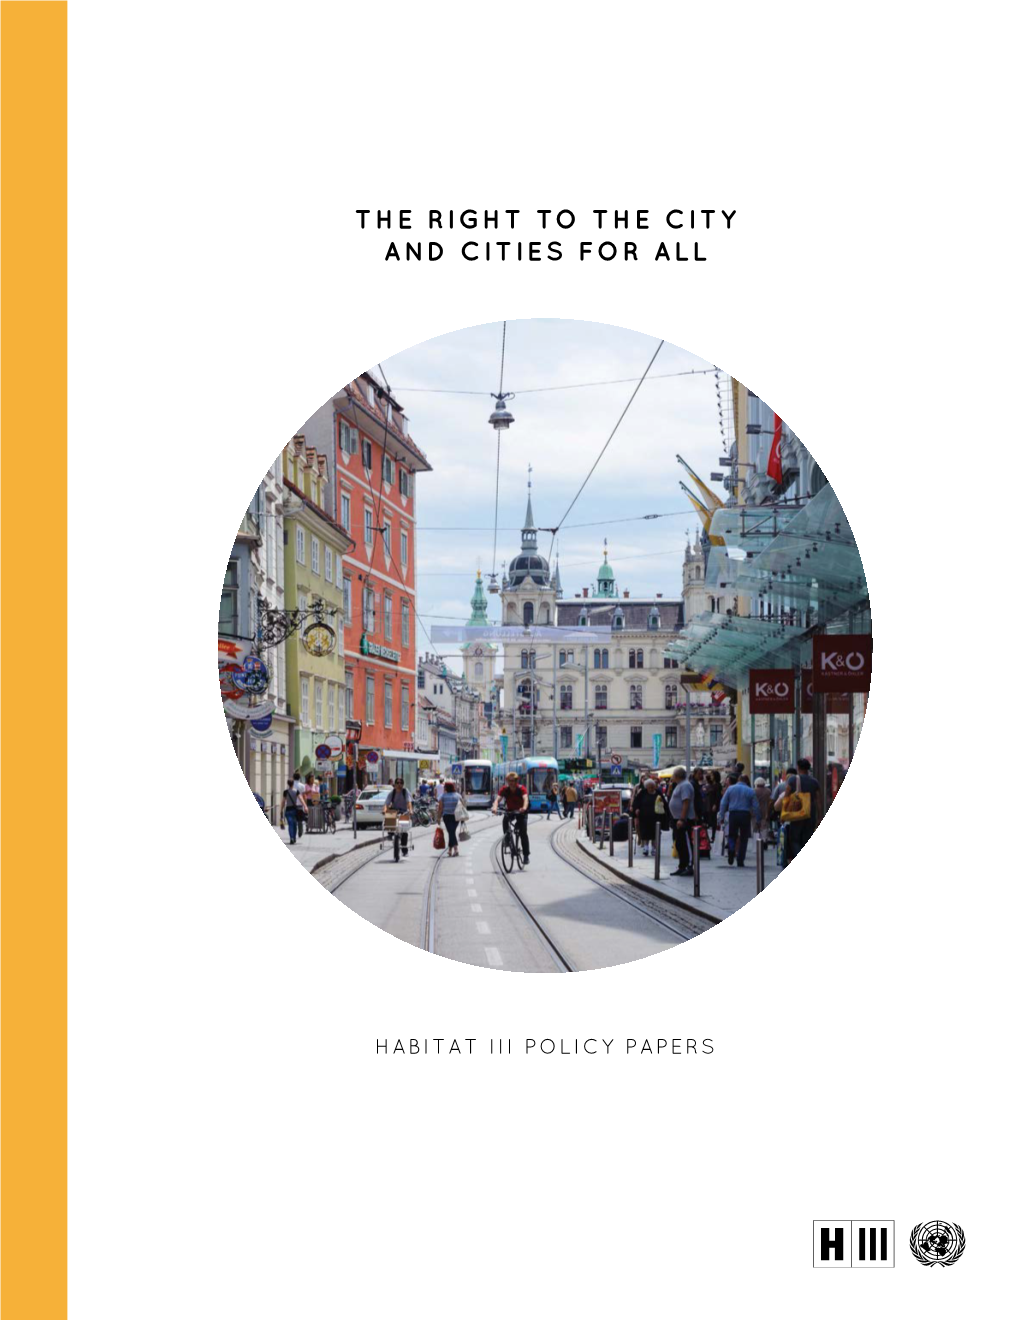 The Right to the City and Cities for All